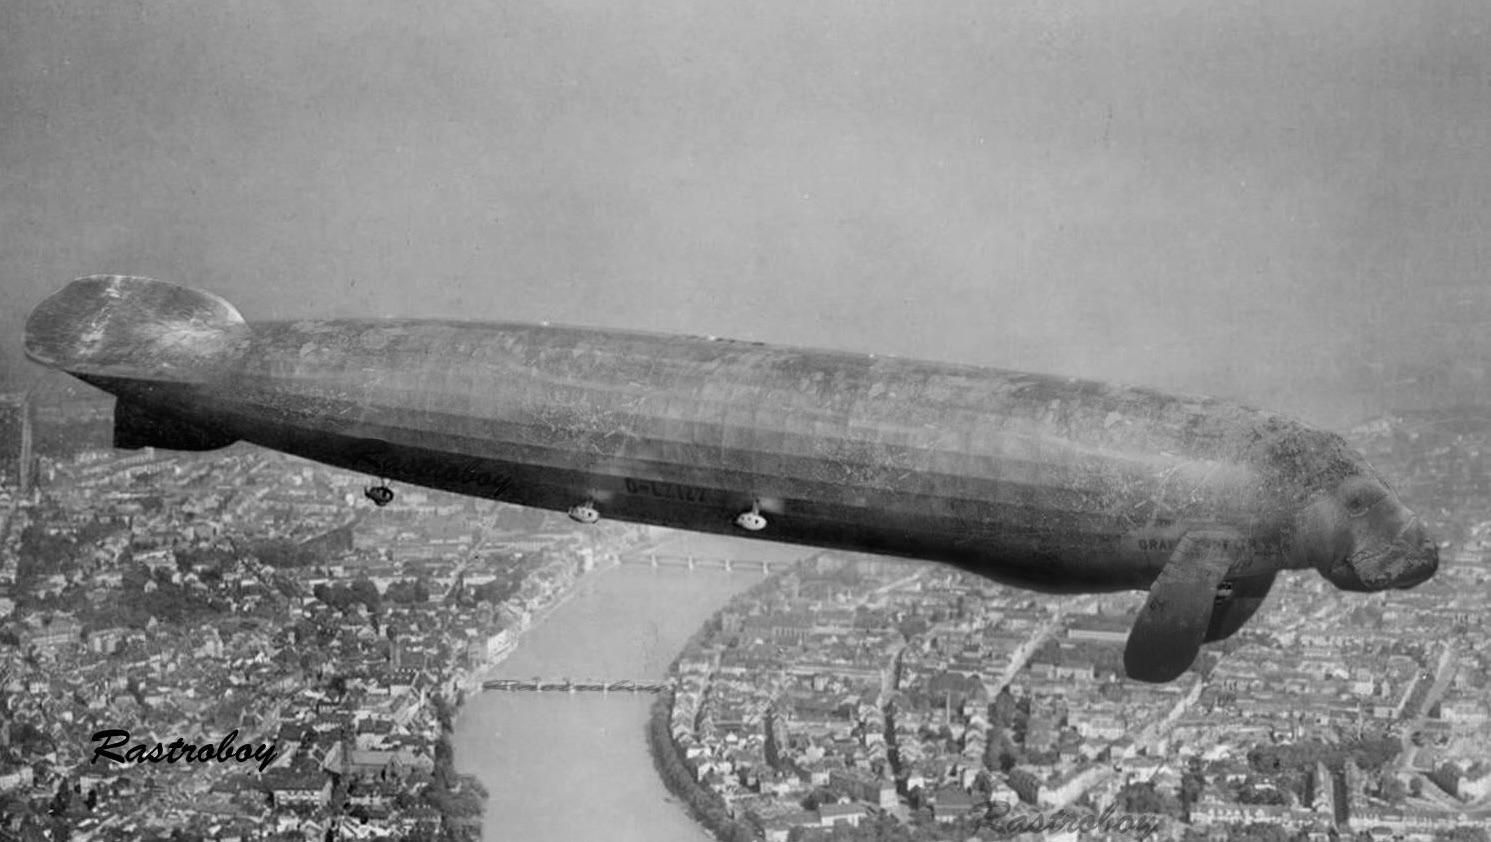 In 1942 after the Hindenburg disaster, Germans traded out the dangerous hydrogen zeppelin for a safer helium manatee.